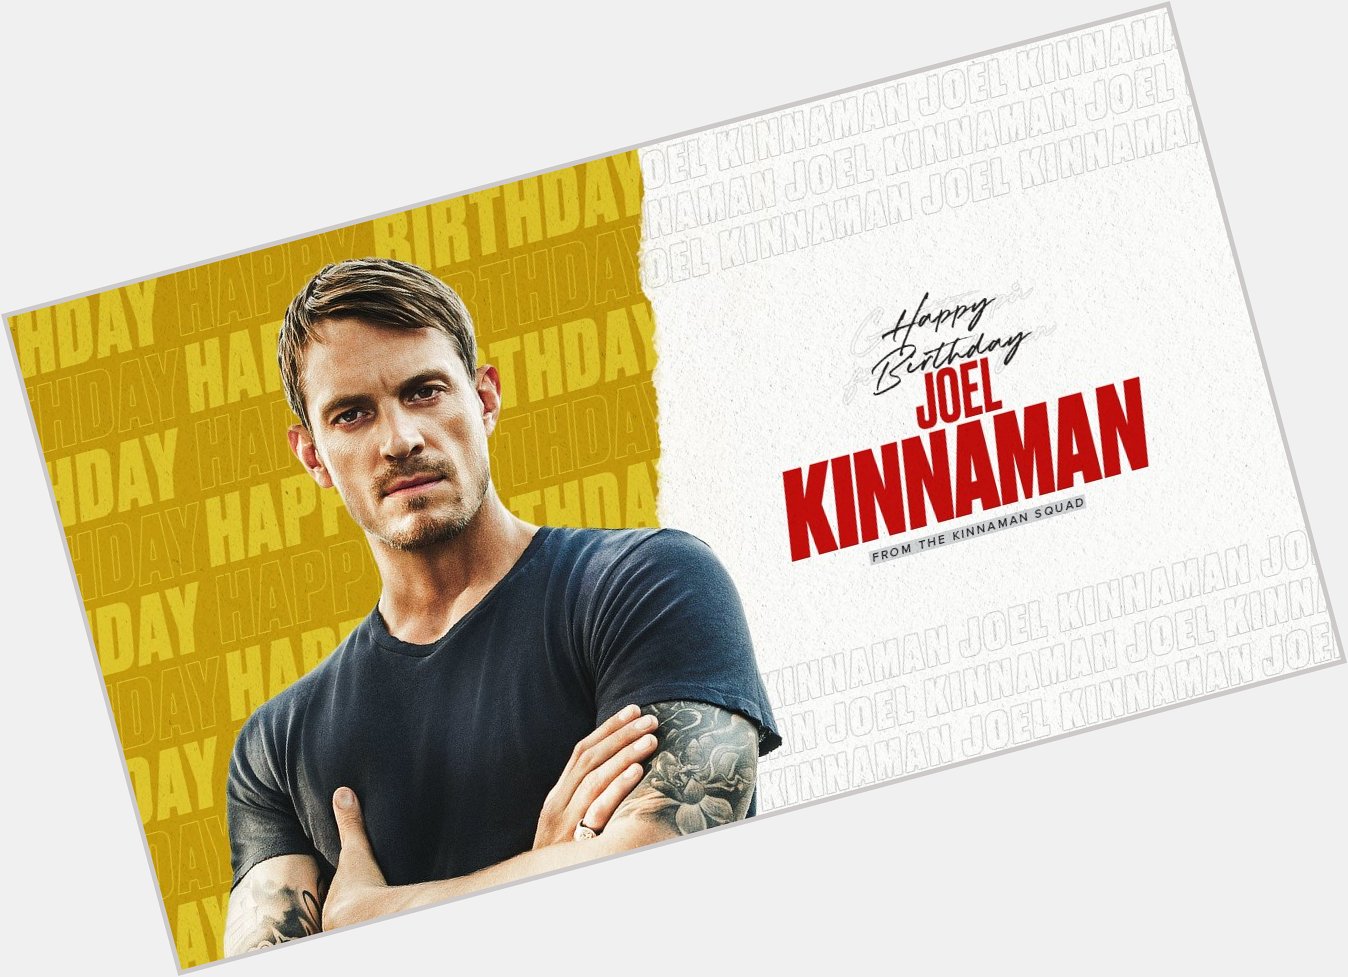 Wishing Joel Kinnaman a very happy birthday! Have an amazing day with your loved ones! 